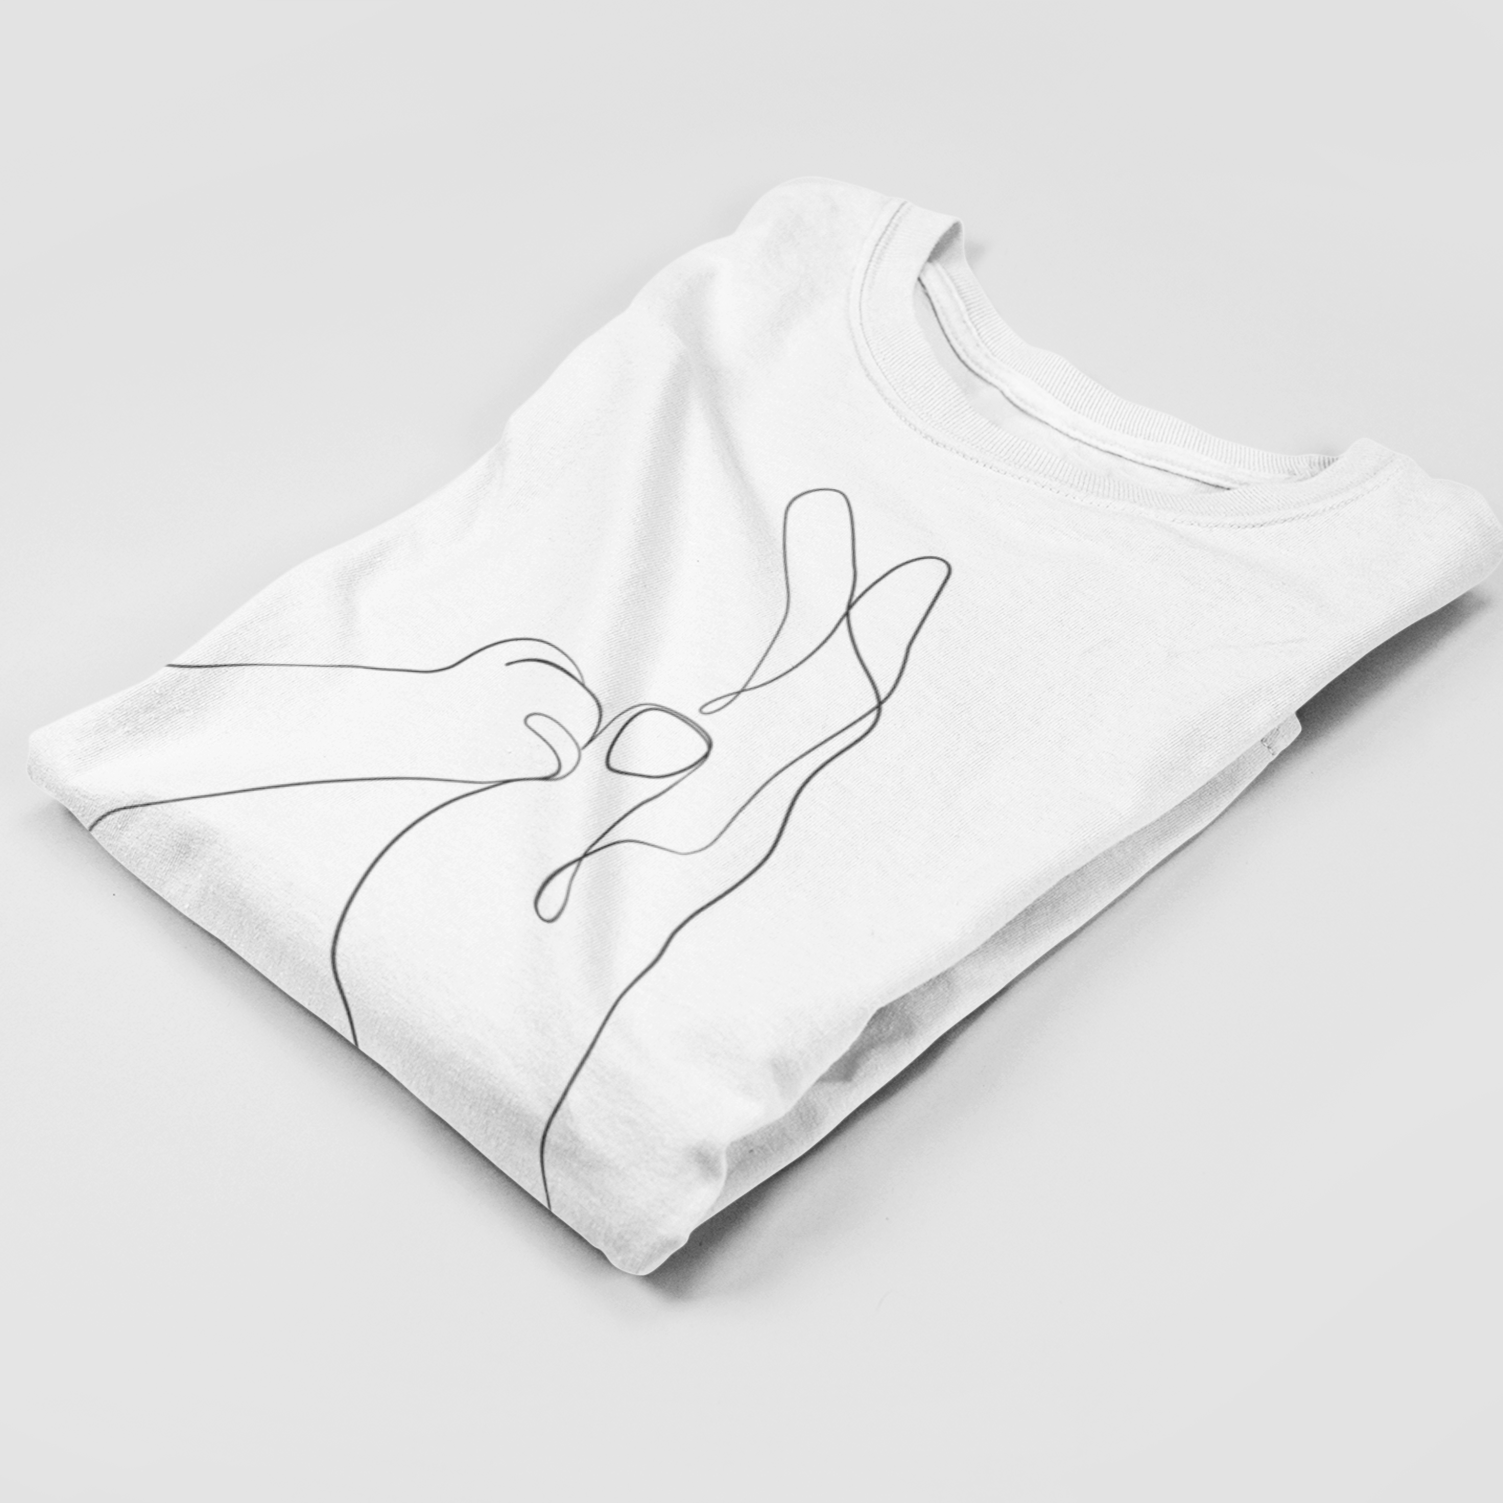 Folded white Human & Cat Paw T-Shirt showcasing the touching cat paw and human hand design, neatly prepared for presentation or as a thoughtful gift.